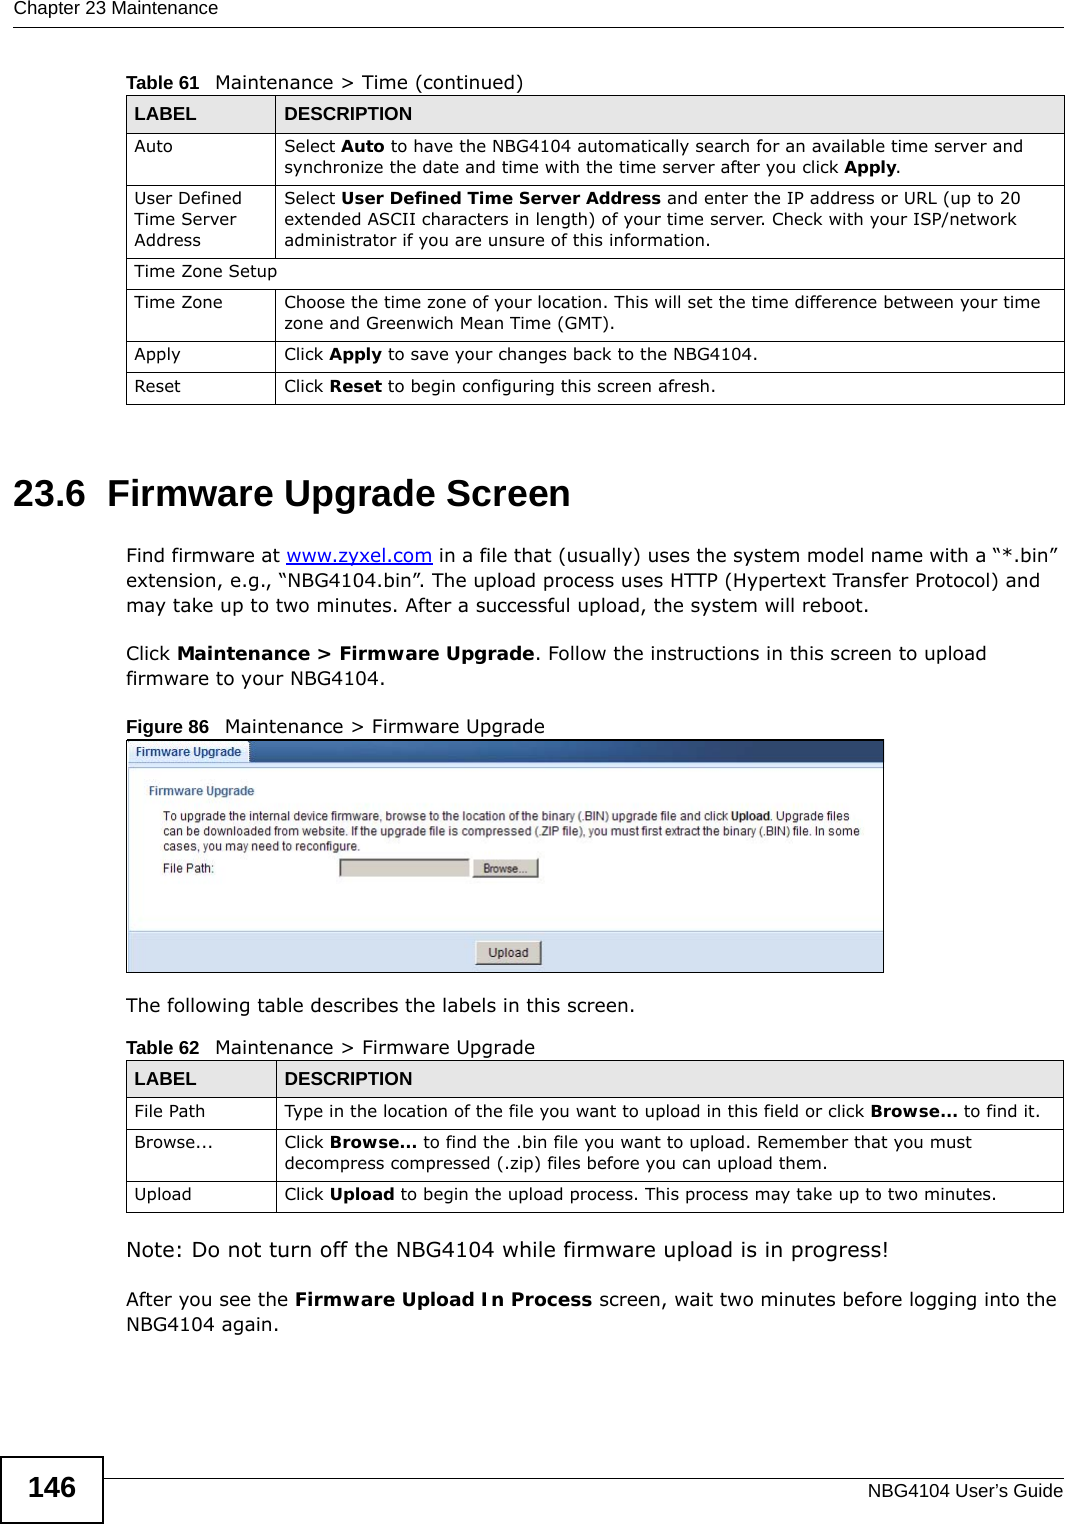 Chapter 23 MaintenanceNBG4104 User’s Guide14623.6  Firmware Upgrade ScreenFind firmware at www.zyxel.com in a file that (usually) uses the system model name with a “*.bin” extension, e.g., “NBG4104.bin”. The upload process uses HTTP (Hypertext Transfer Protocol) and may take up to two minutes. After a successful upload, the system will reboot.Click Maintenance &gt; Firmware Upgrade. Follow the instructions in this screen to upload firmware to your NBG4104. Figure 86   Maintenance &gt; Firmware Upgrade The following table describes the labels in this screen.Note: Do not turn off the NBG4104 while firmware upload is in progress!After you see the Firmware Upload In Process screen, wait two minutes before logging into the NBG4104 again.Auto Select Auto to have the NBG4104 automatically search for an available time server and synchronize the date and time with the time server after you click Apply.User Defined Time Server Address Select User Defined Time Server Address and enter the IP address or URL (up to 20 extended ASCII characters in length) of your time server. Check with your ISP/network administrator if you are unsure of this information.Time Zone SetupTime Zone Choose the time zone of your location. This will set the time difference between your time zone and Greenwich Mean Time (GMT). Apply Click Apply to save your changes back to the NBG4104.Reset Click Reset to begin configuring this screen afresh.Table 61   Maintenance &gt; Time (continued)LABEL DESCRIPTIONTable 62   Maintenance &gt; Firmware UpgradeLABEL DESCRIPTIONFile Path  Type in the location of the file you want to upload in this field or click Browse... to find it.Browse...  Click Browse... to find the .bin file you want to upload. Remember that you must decompress compressed (.zip) files before you can upload them. Upload  Click Upload to begin the upload process. This process may take up to two minutes.